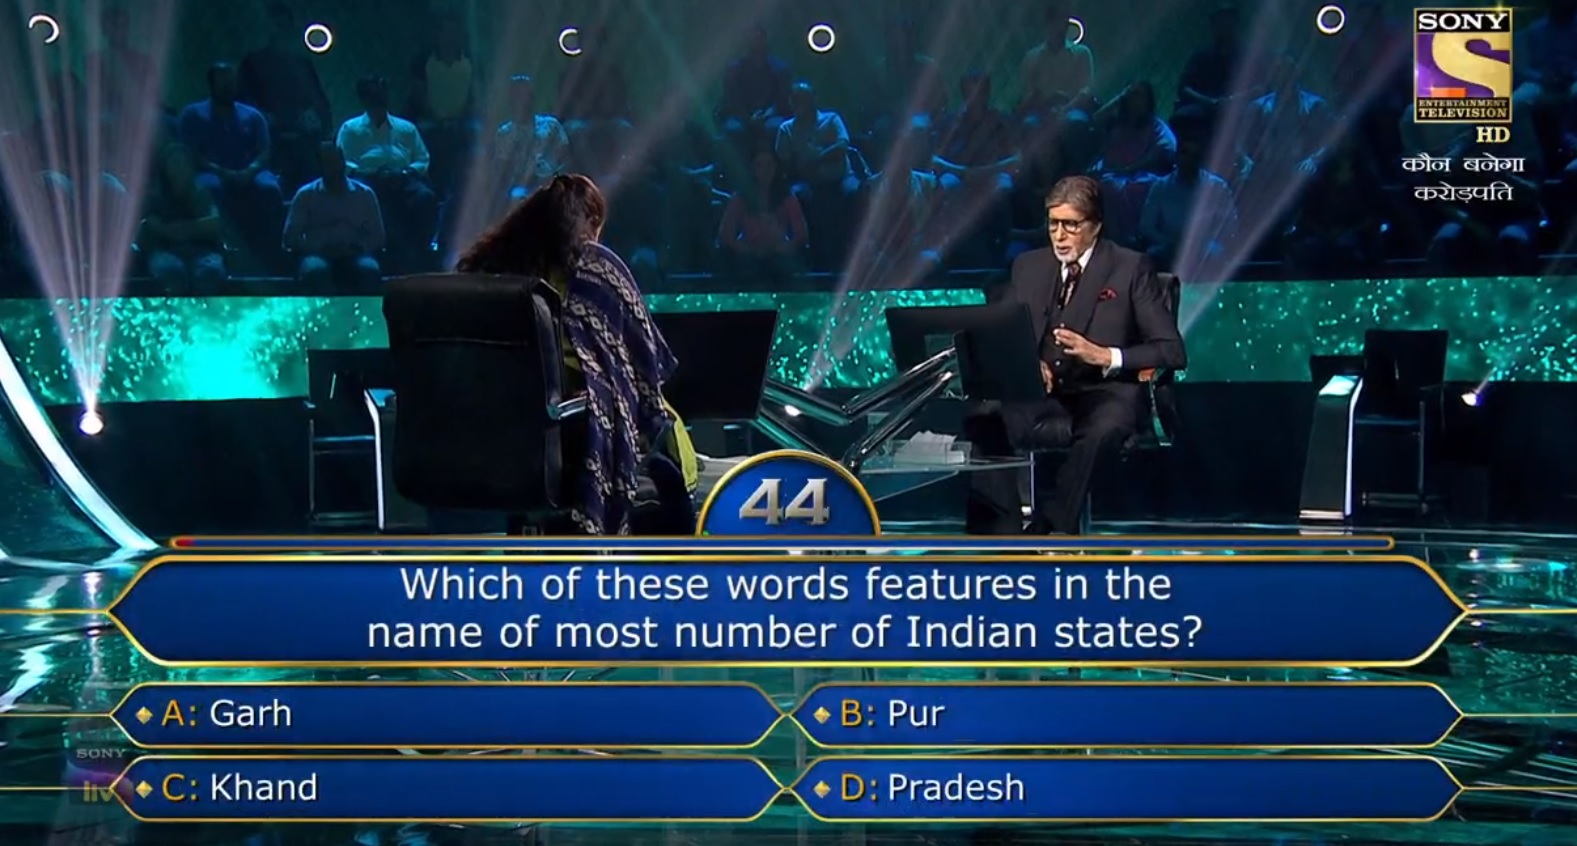 Ques : Which of these words features in the name of most number of Indian states?